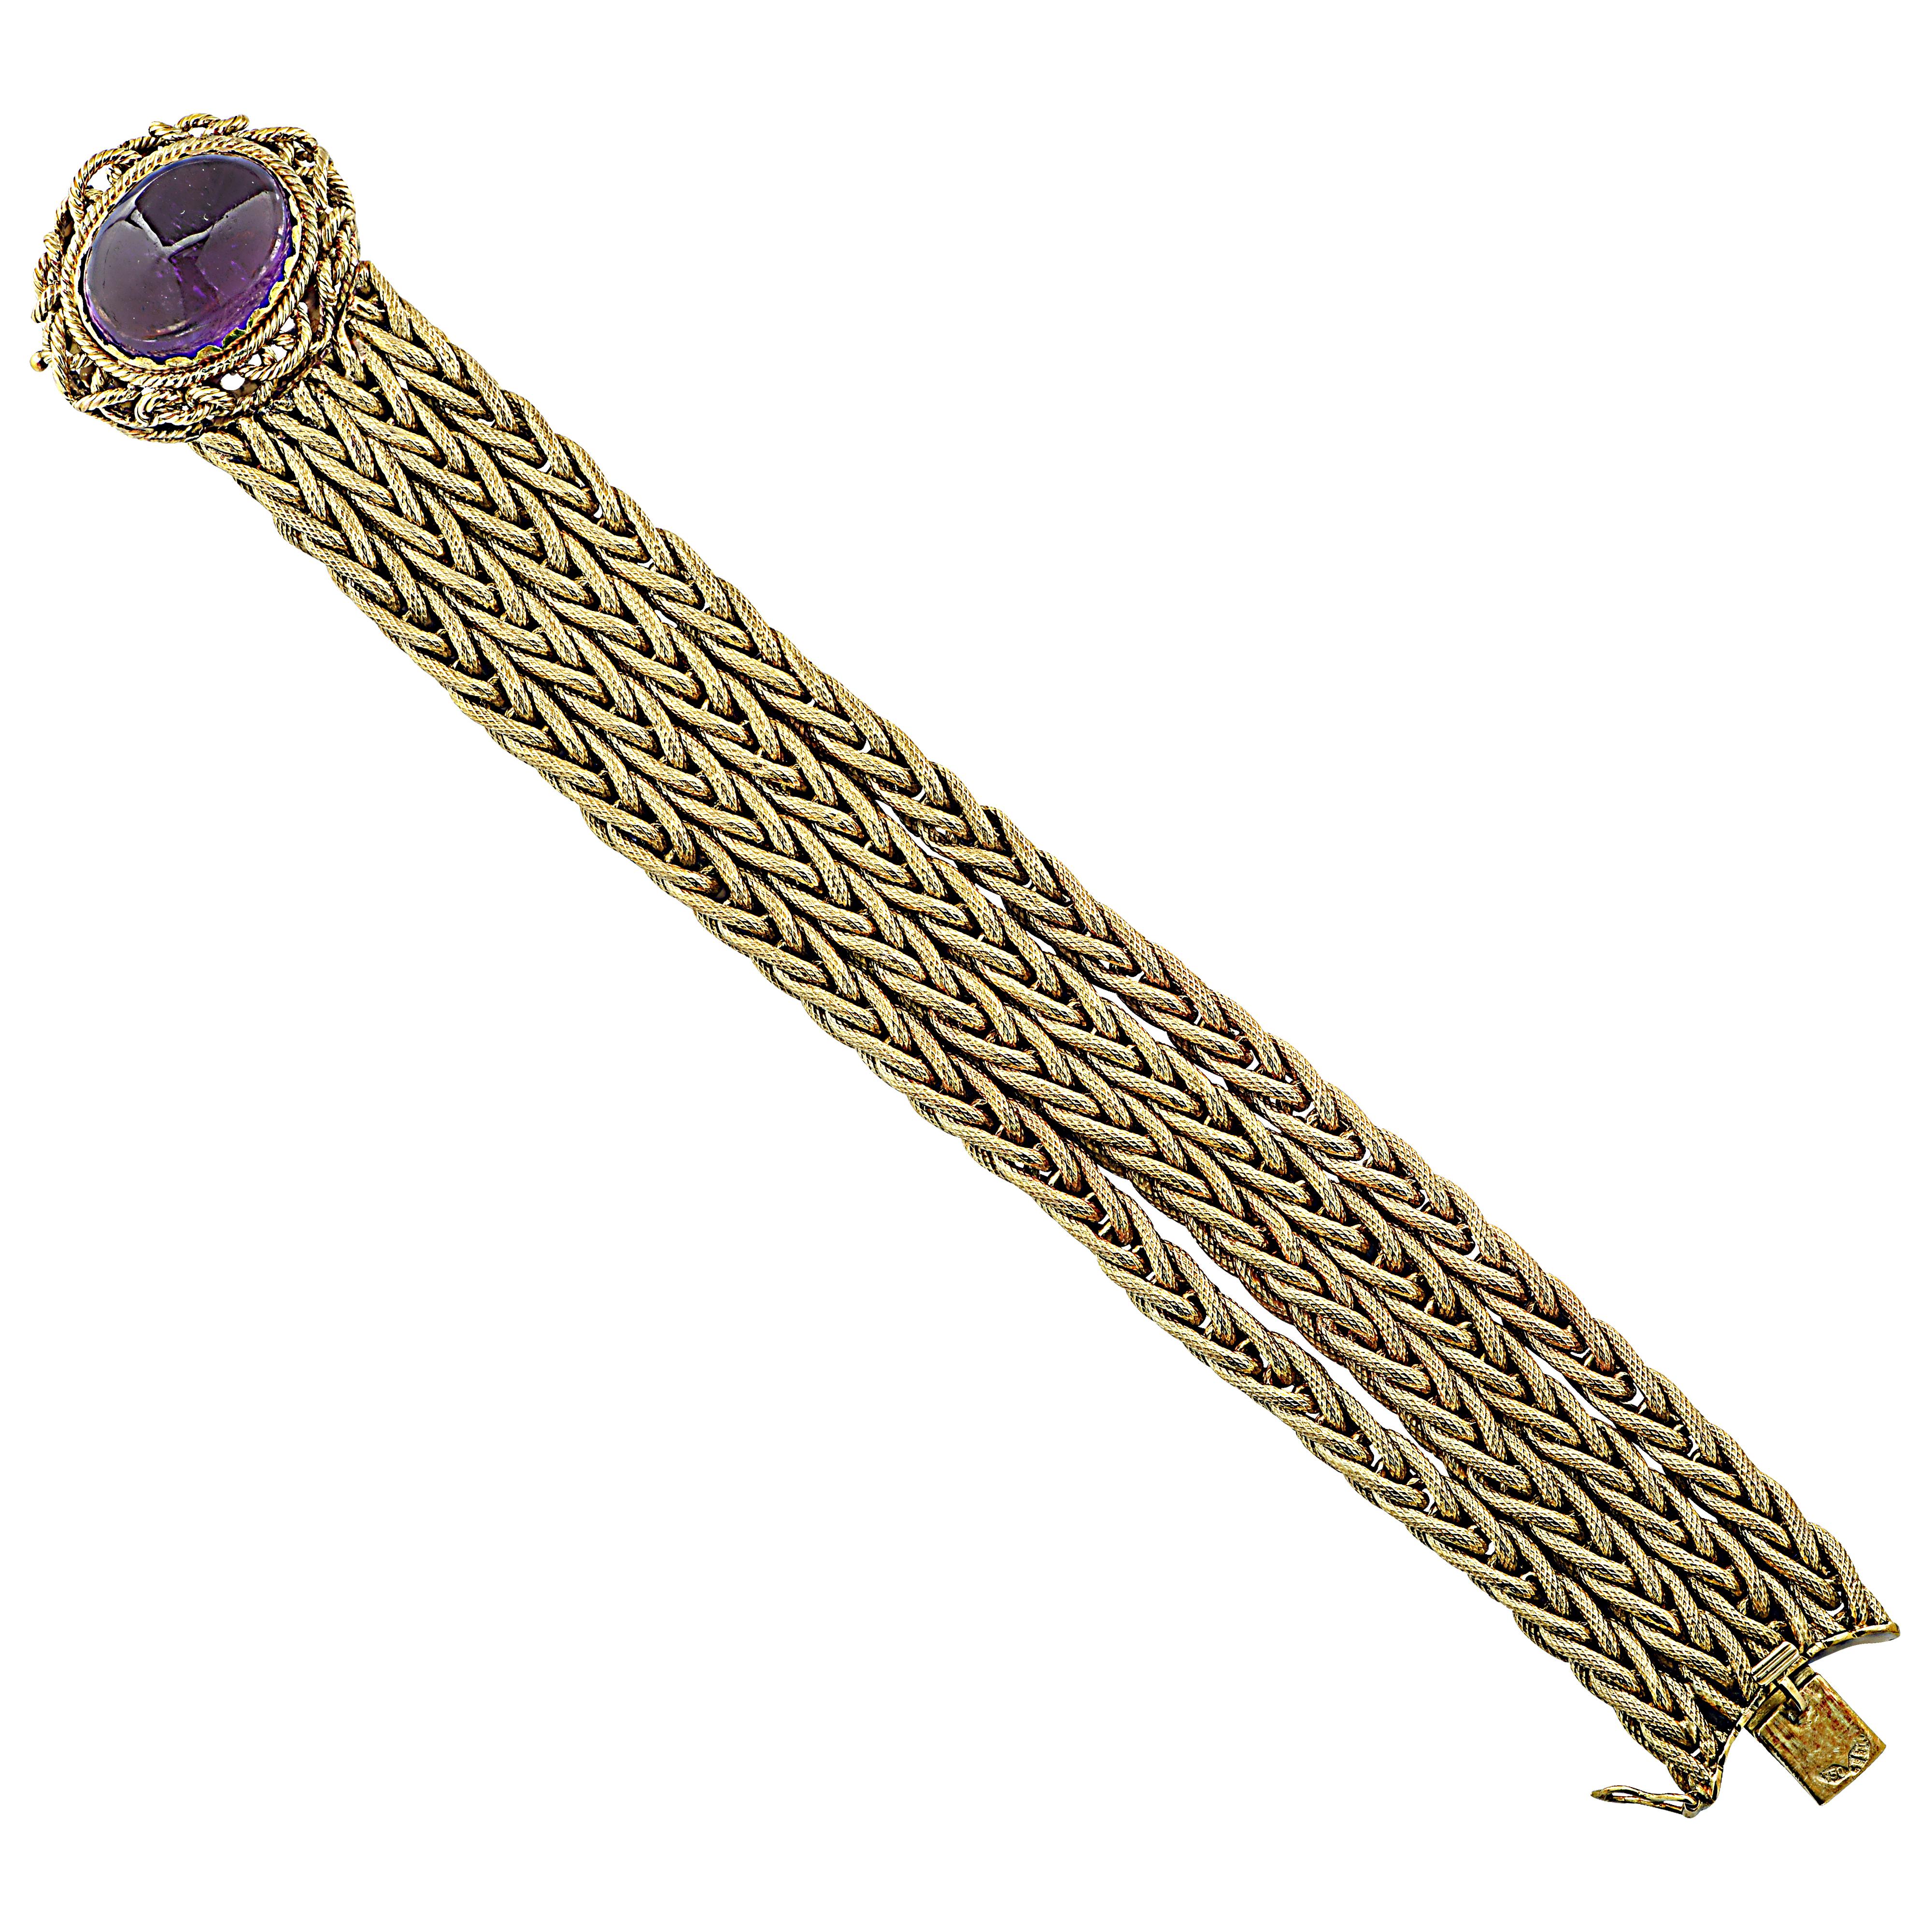 Stunning bracelet crafted in 18 karat yellow gold featuring a spectacular oval shape Amethyst cabochon weighing approximately 23 carats, resting regally on a bed of intricately twisted and woven gold strands. The face of this beautiful bracelet